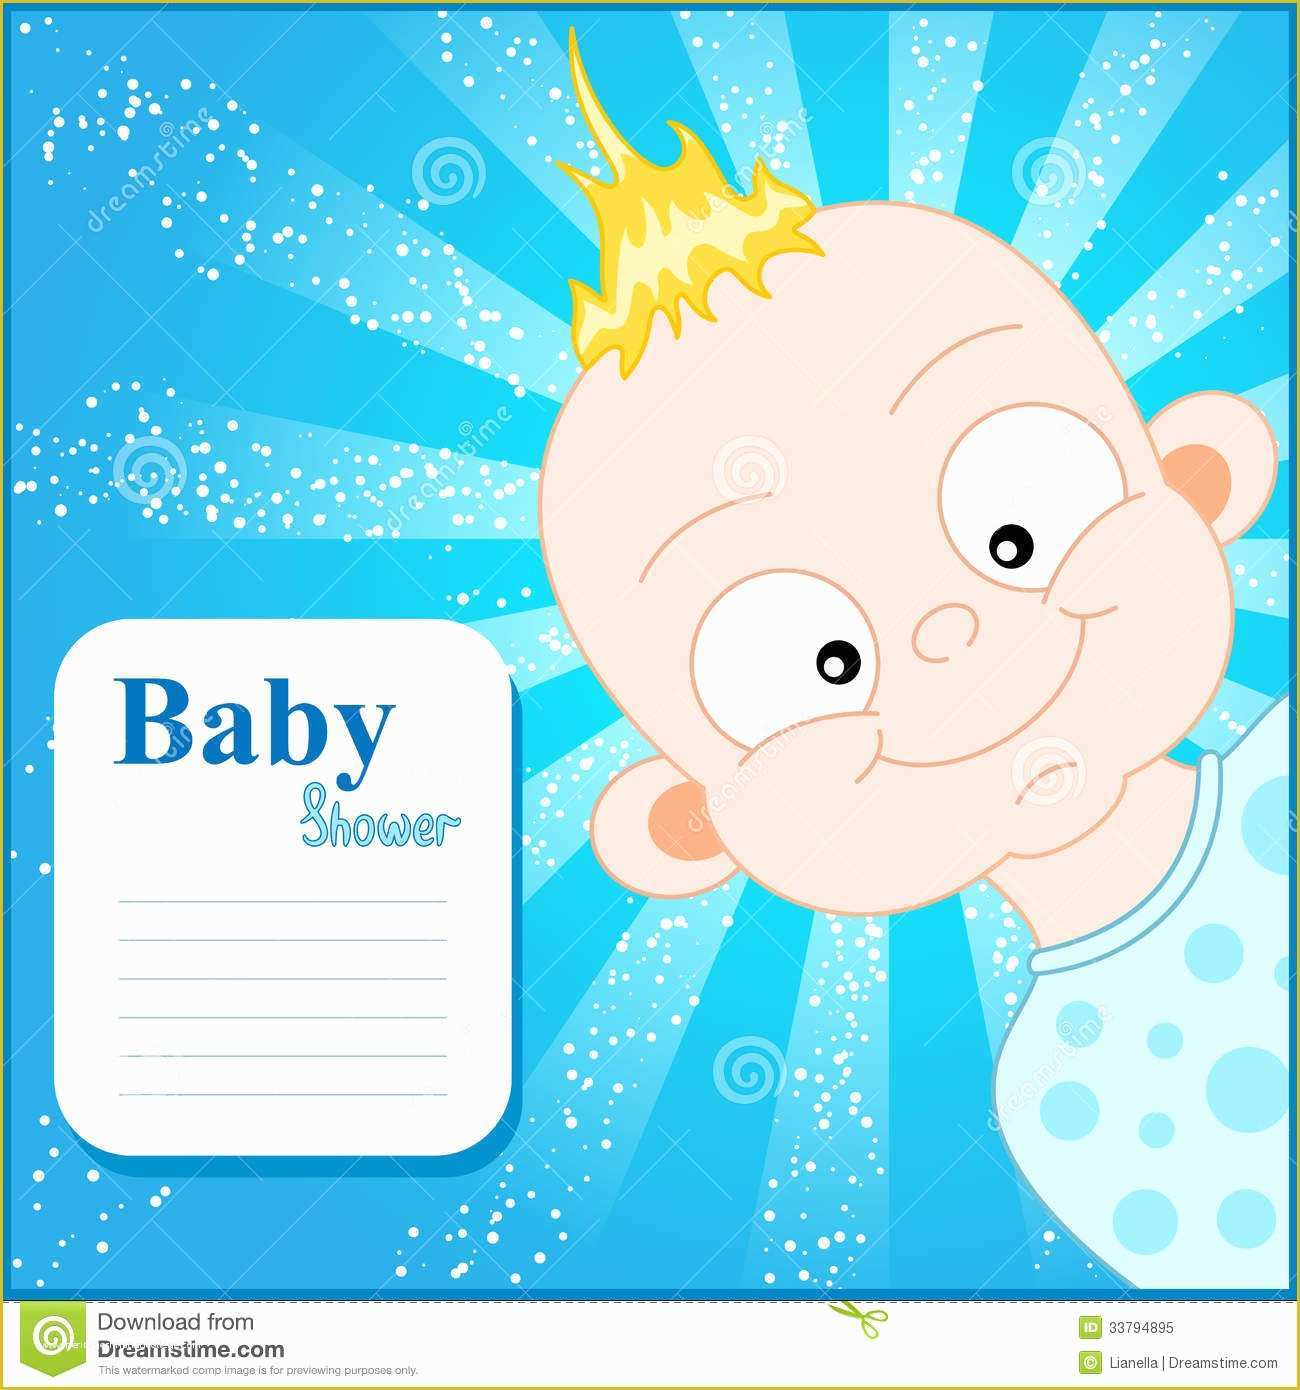 Free Online Baby Shower Invitations Templates Of Baby Boy Baby Shower Invitations Templates